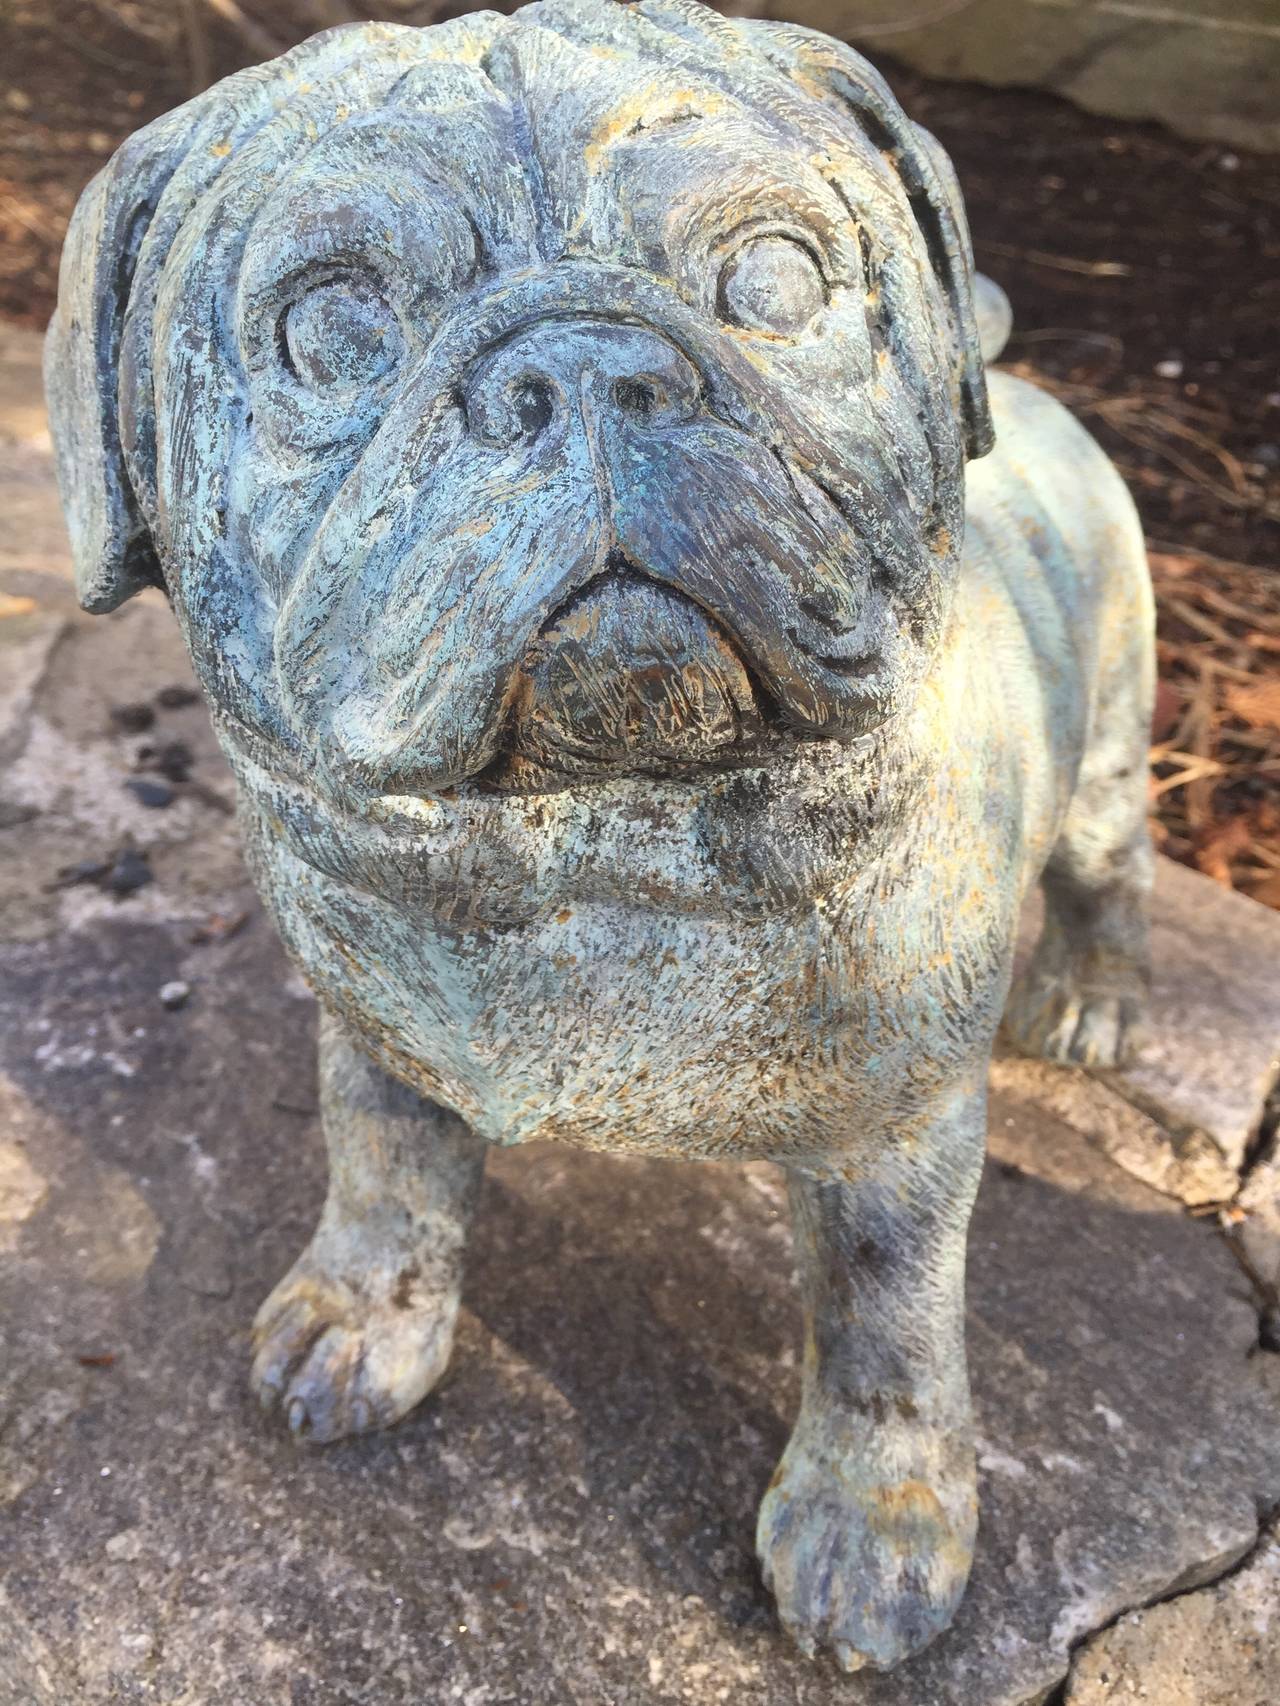 This little guy is simply adorable and totally lifelike in his conformation and expression! Cast from bronze and with a lovely verdigris patina, he will bring you years of enjoyment standing alert on your top step or guarding your garden. Not so